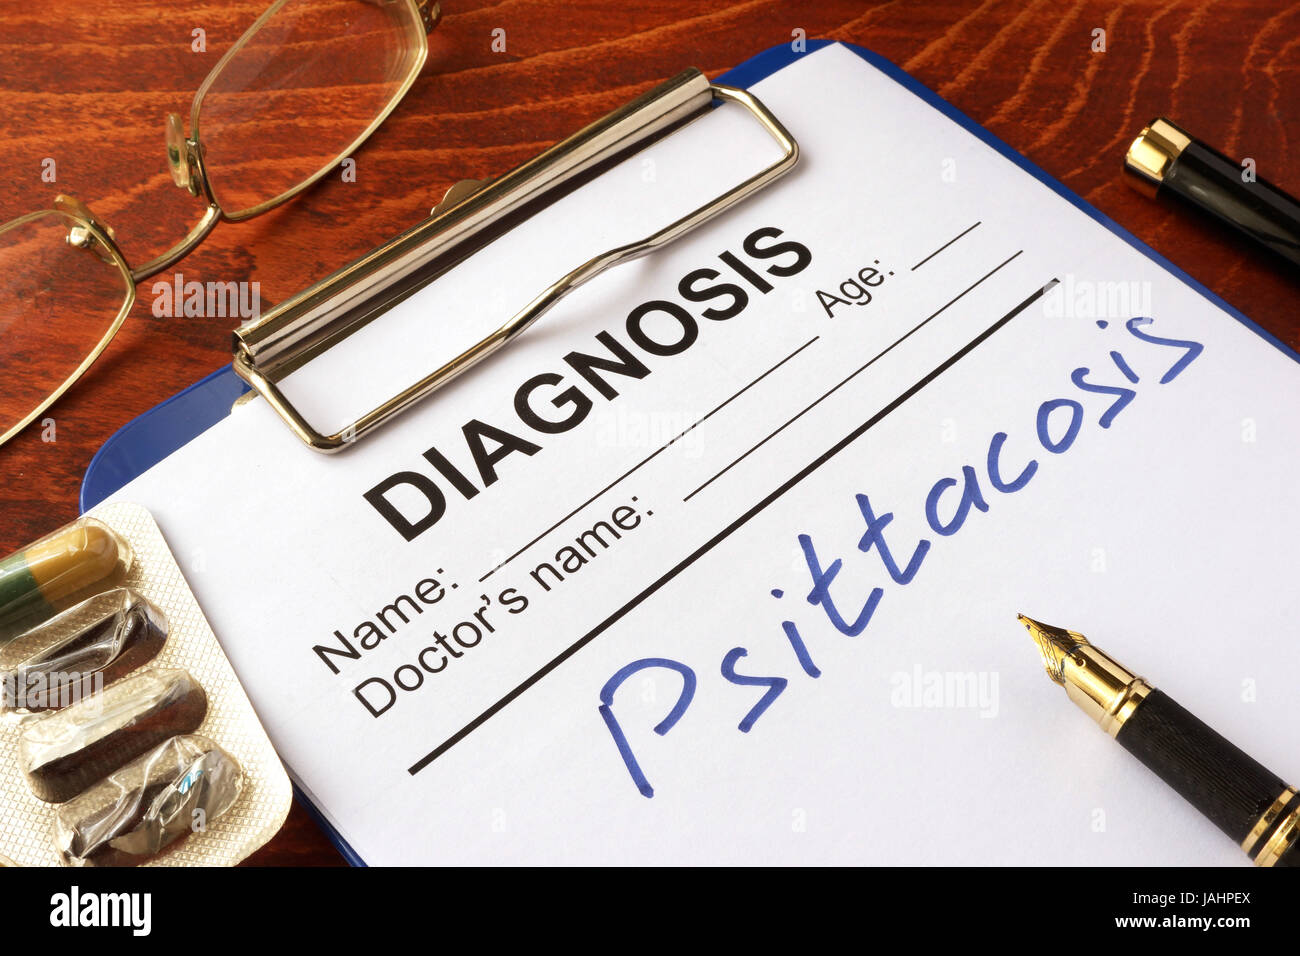 Medical form with diagnosis Psittacosis on a table. Stock Photo